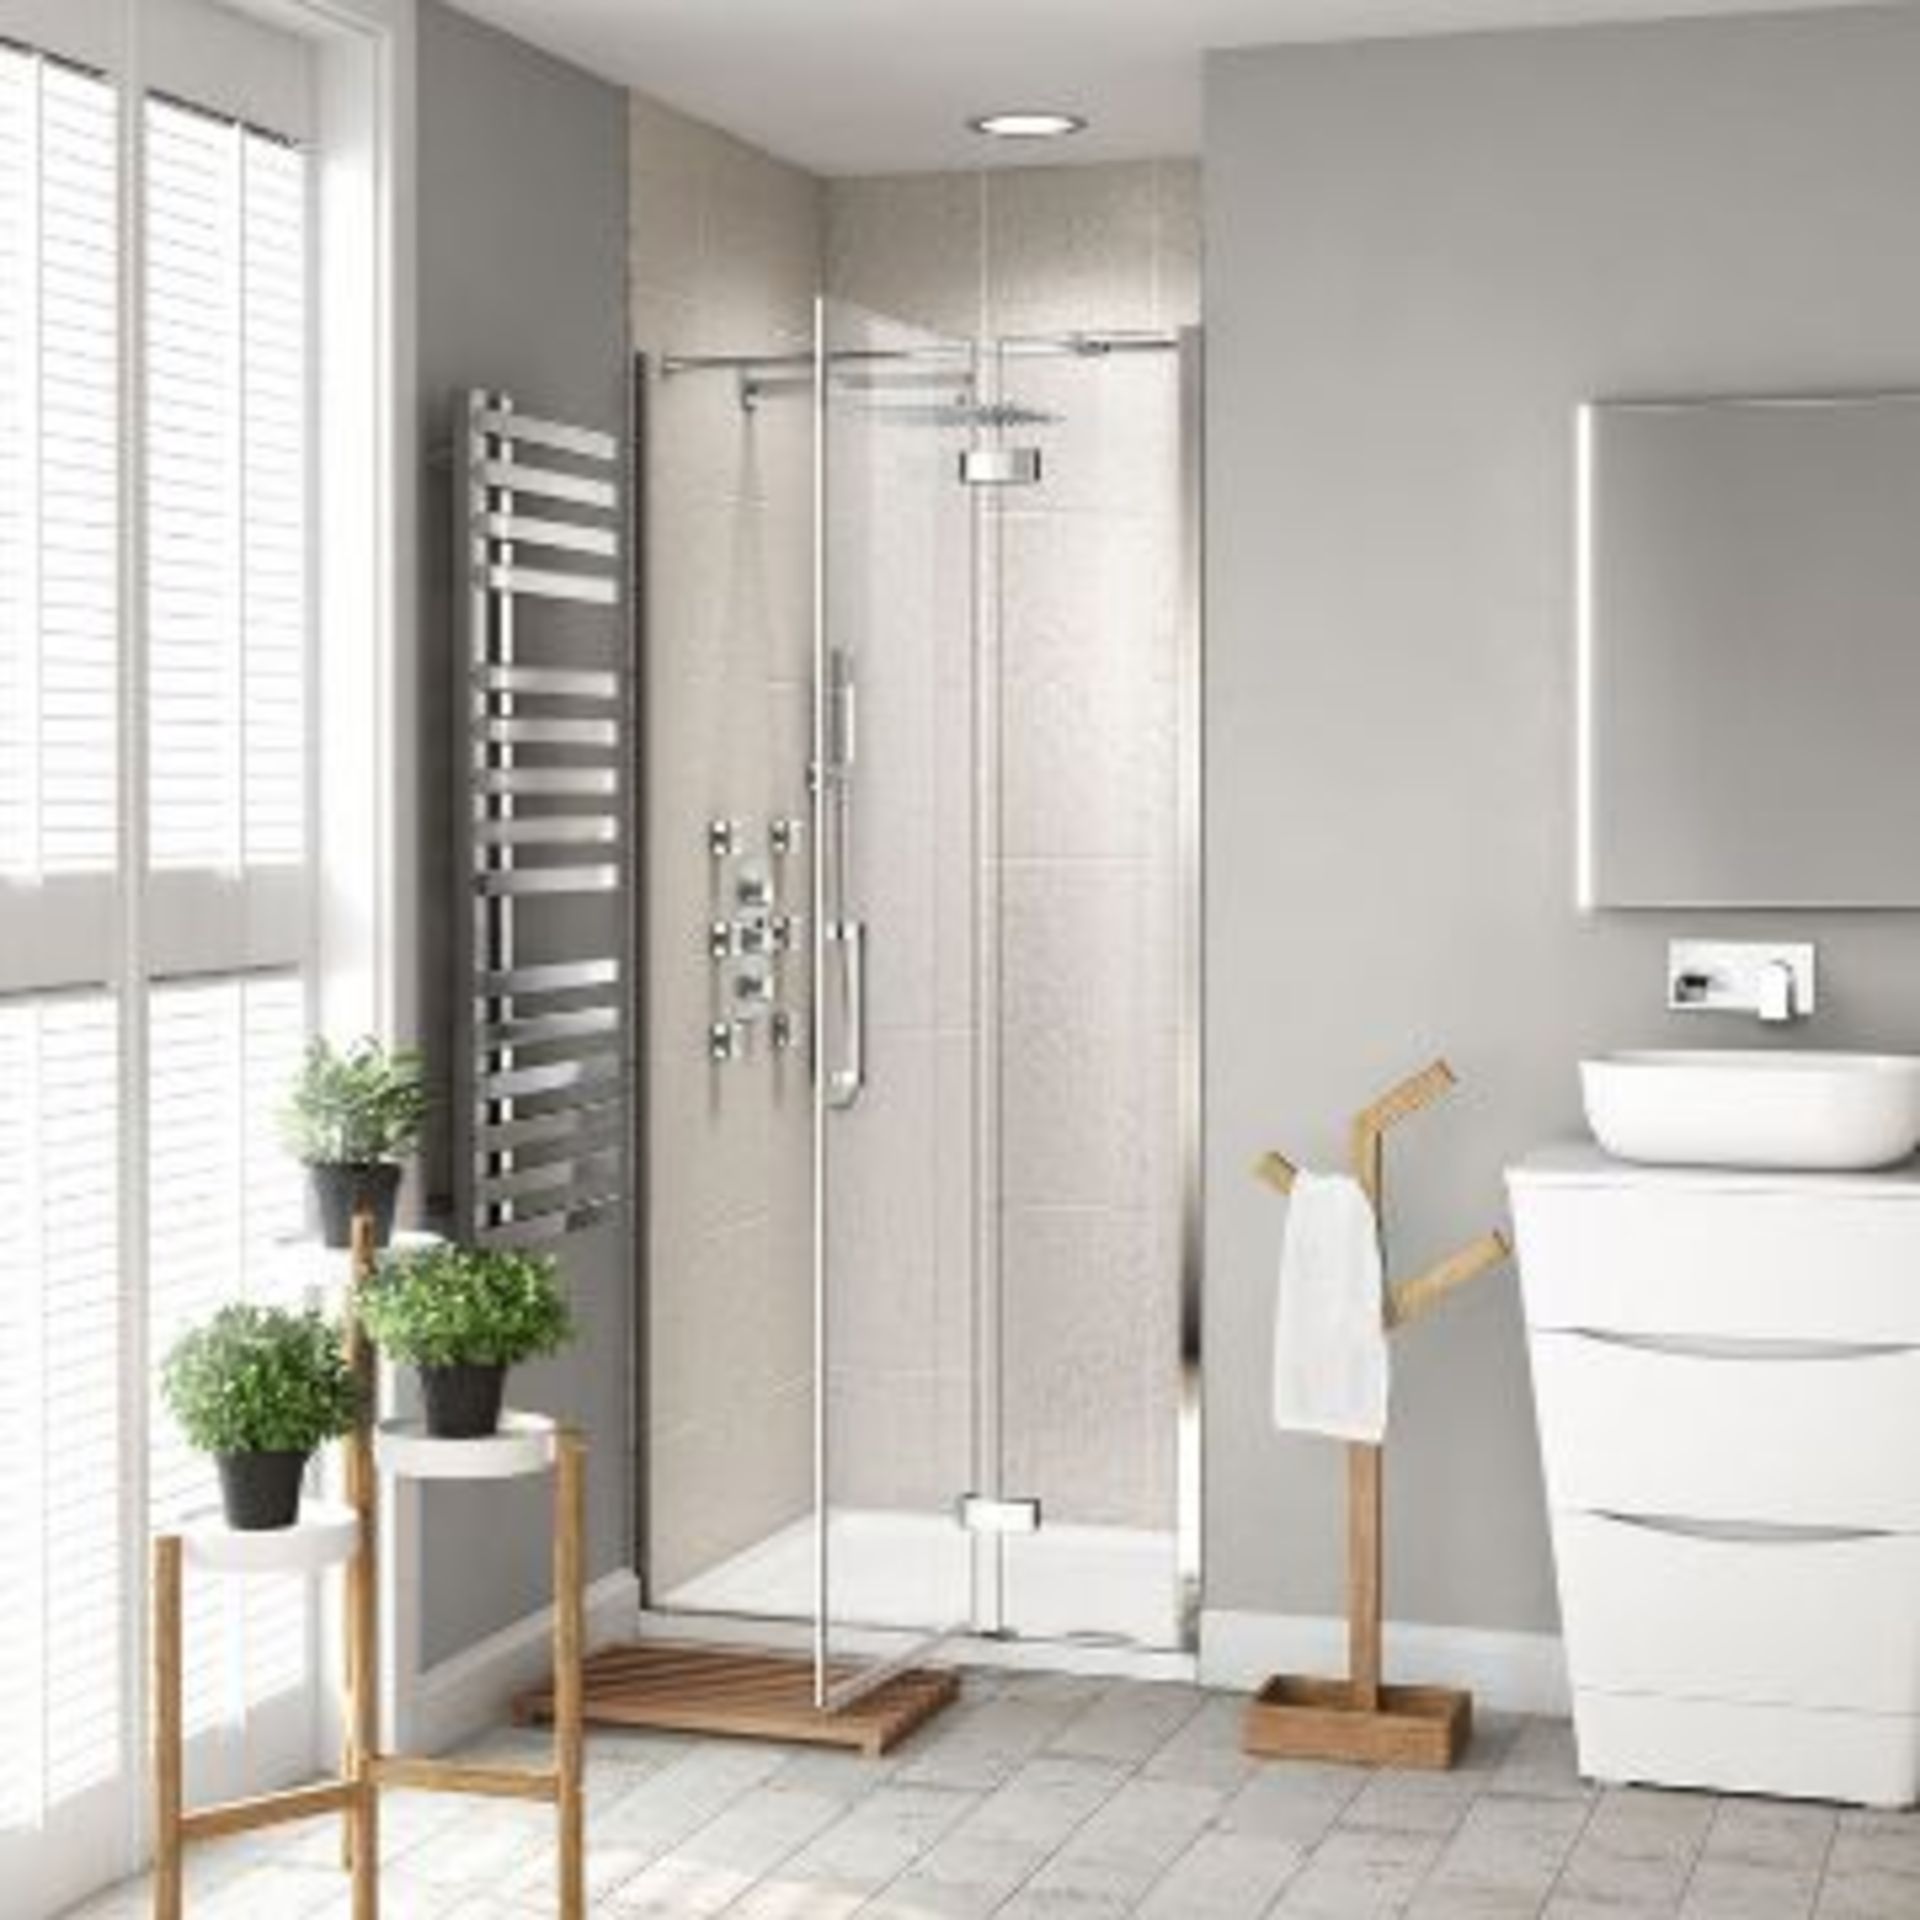 New & Boxed 700 mm - 8 mm - Premium Easy clean Hinged Shower Door. RRP £499.99. H82600Cp. 8 mm - Image 2 of 2